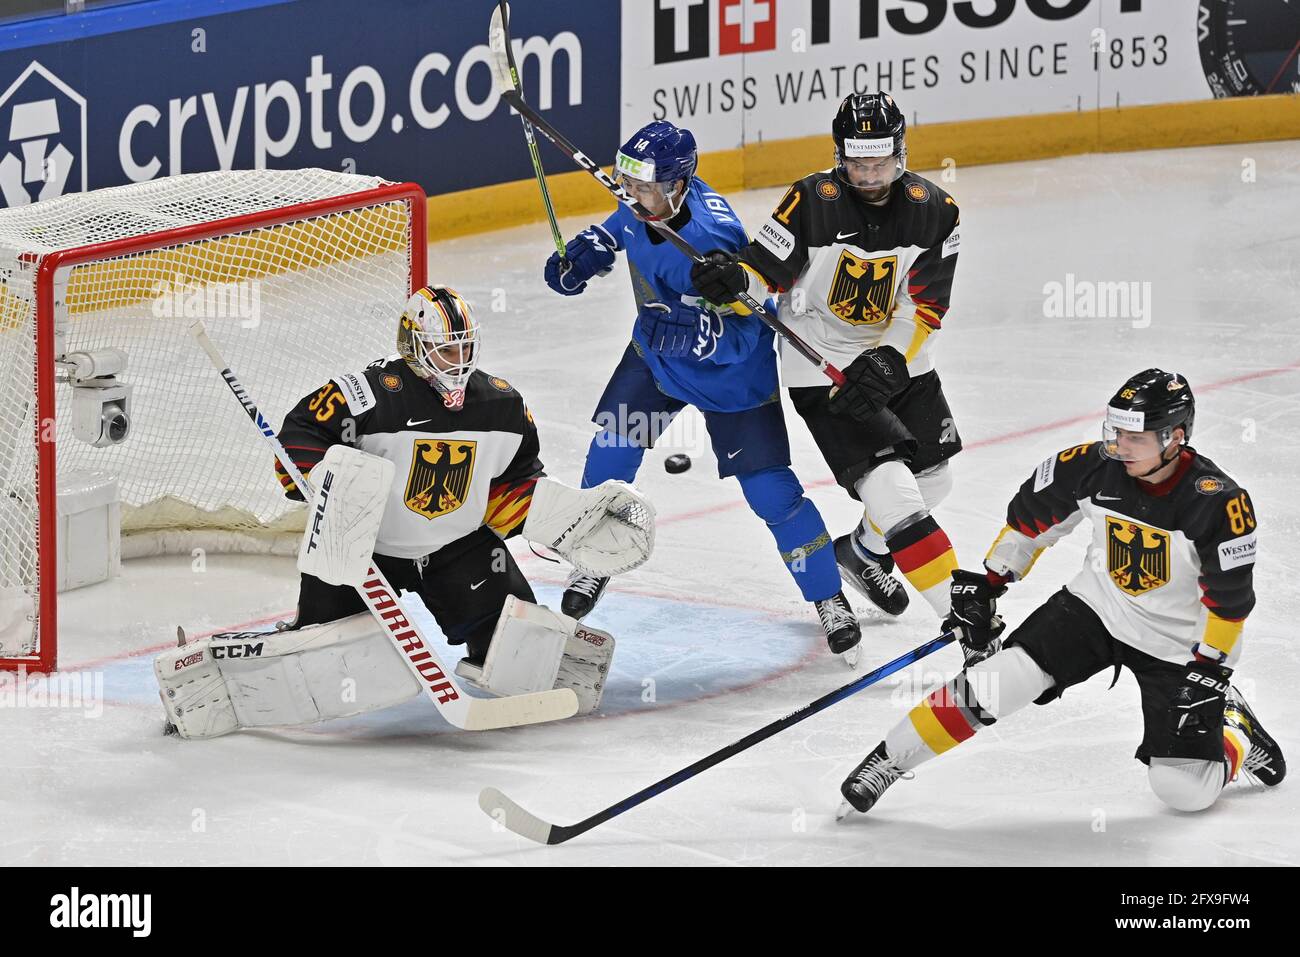 Riga, Latvia. 26th May, 2021. L-R Goalkeeper Mathias Niederberger (GER), Curtis Valk (KAZ) and Marco Nowak and Marcel Brandt (both GER) in action during the 2021 IIHF Ice Hockey World Championship, Group B match Kazakhstan vs Germany, played in Riga, Latvia, on May 26, 2021. Credit: Vit Simanek/CTK Photo/Alamy Live News Stock Photo